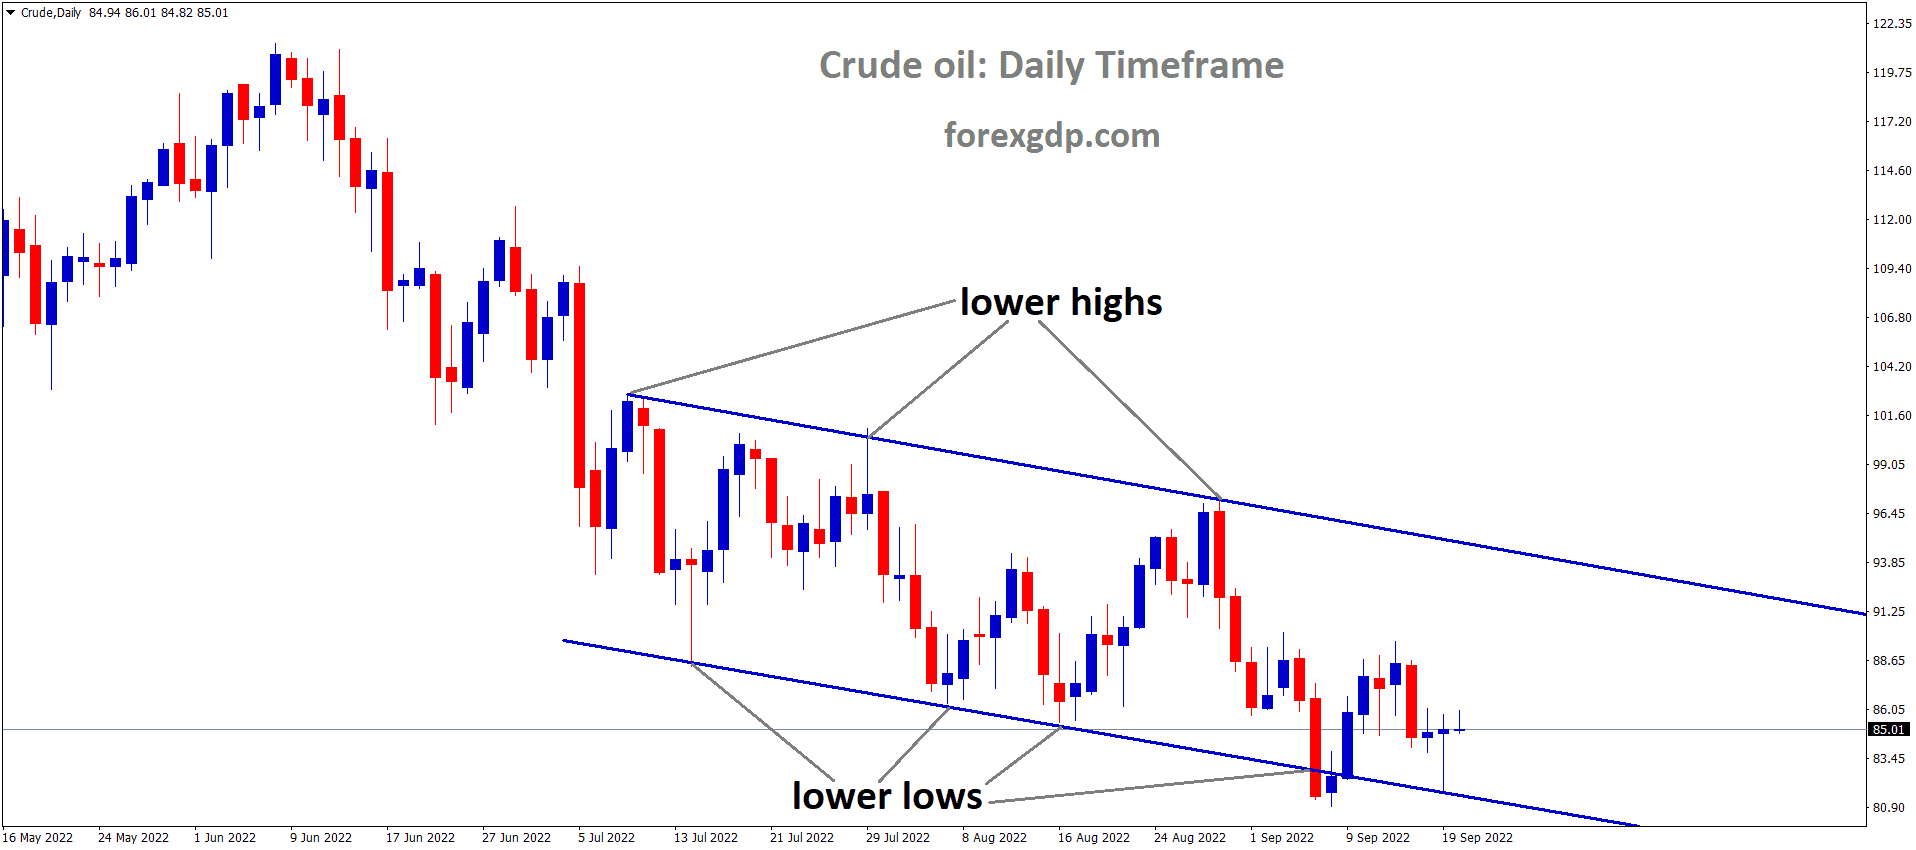 Crude Oil Price is moving in the Descending channel and the market has rebounded from the lower low area of the channel